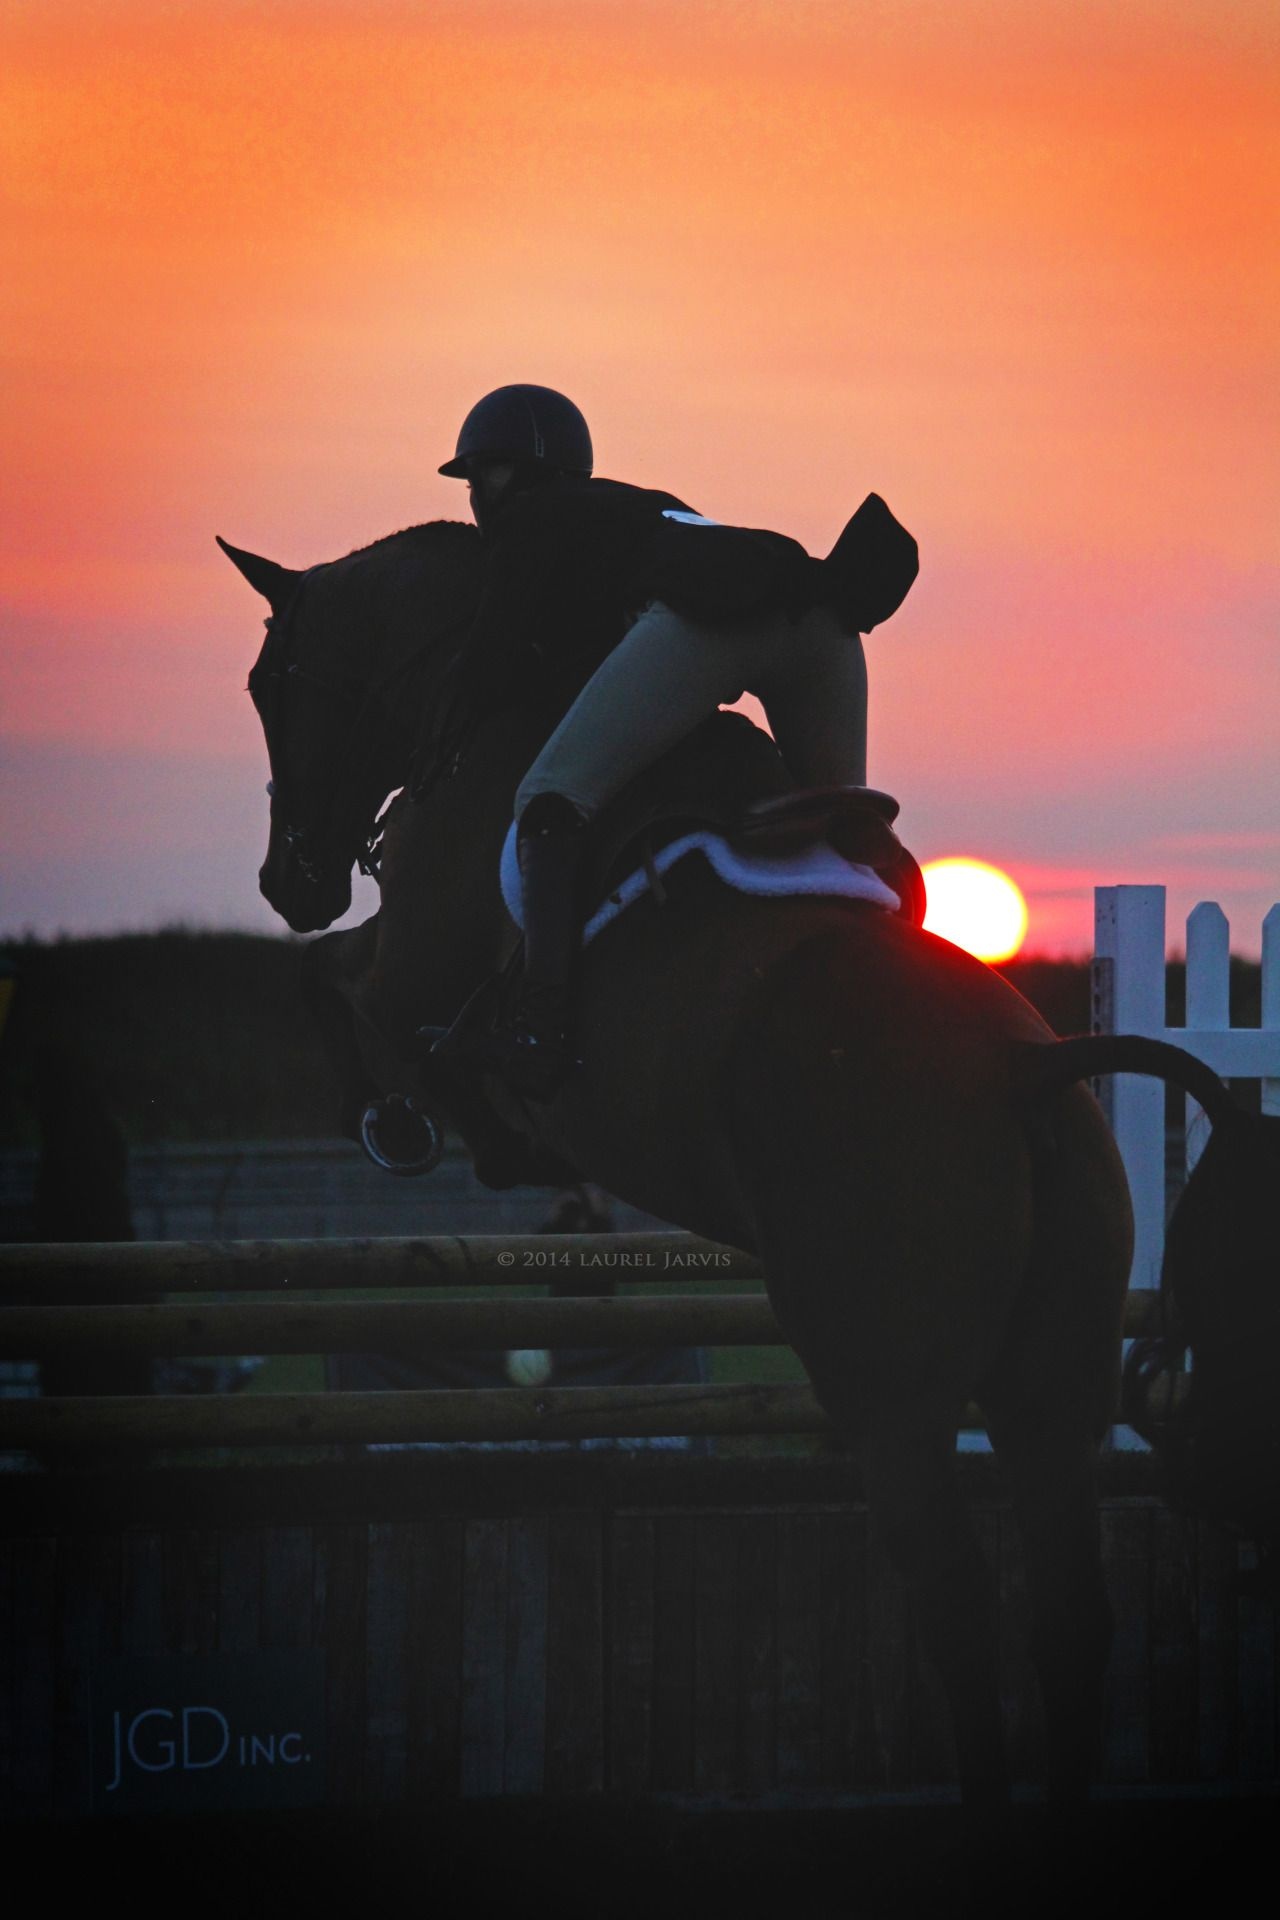 Eventing: Show jumping training in the sunset, Recreational activity and equestrian sport. 1280x1920 HD Background.